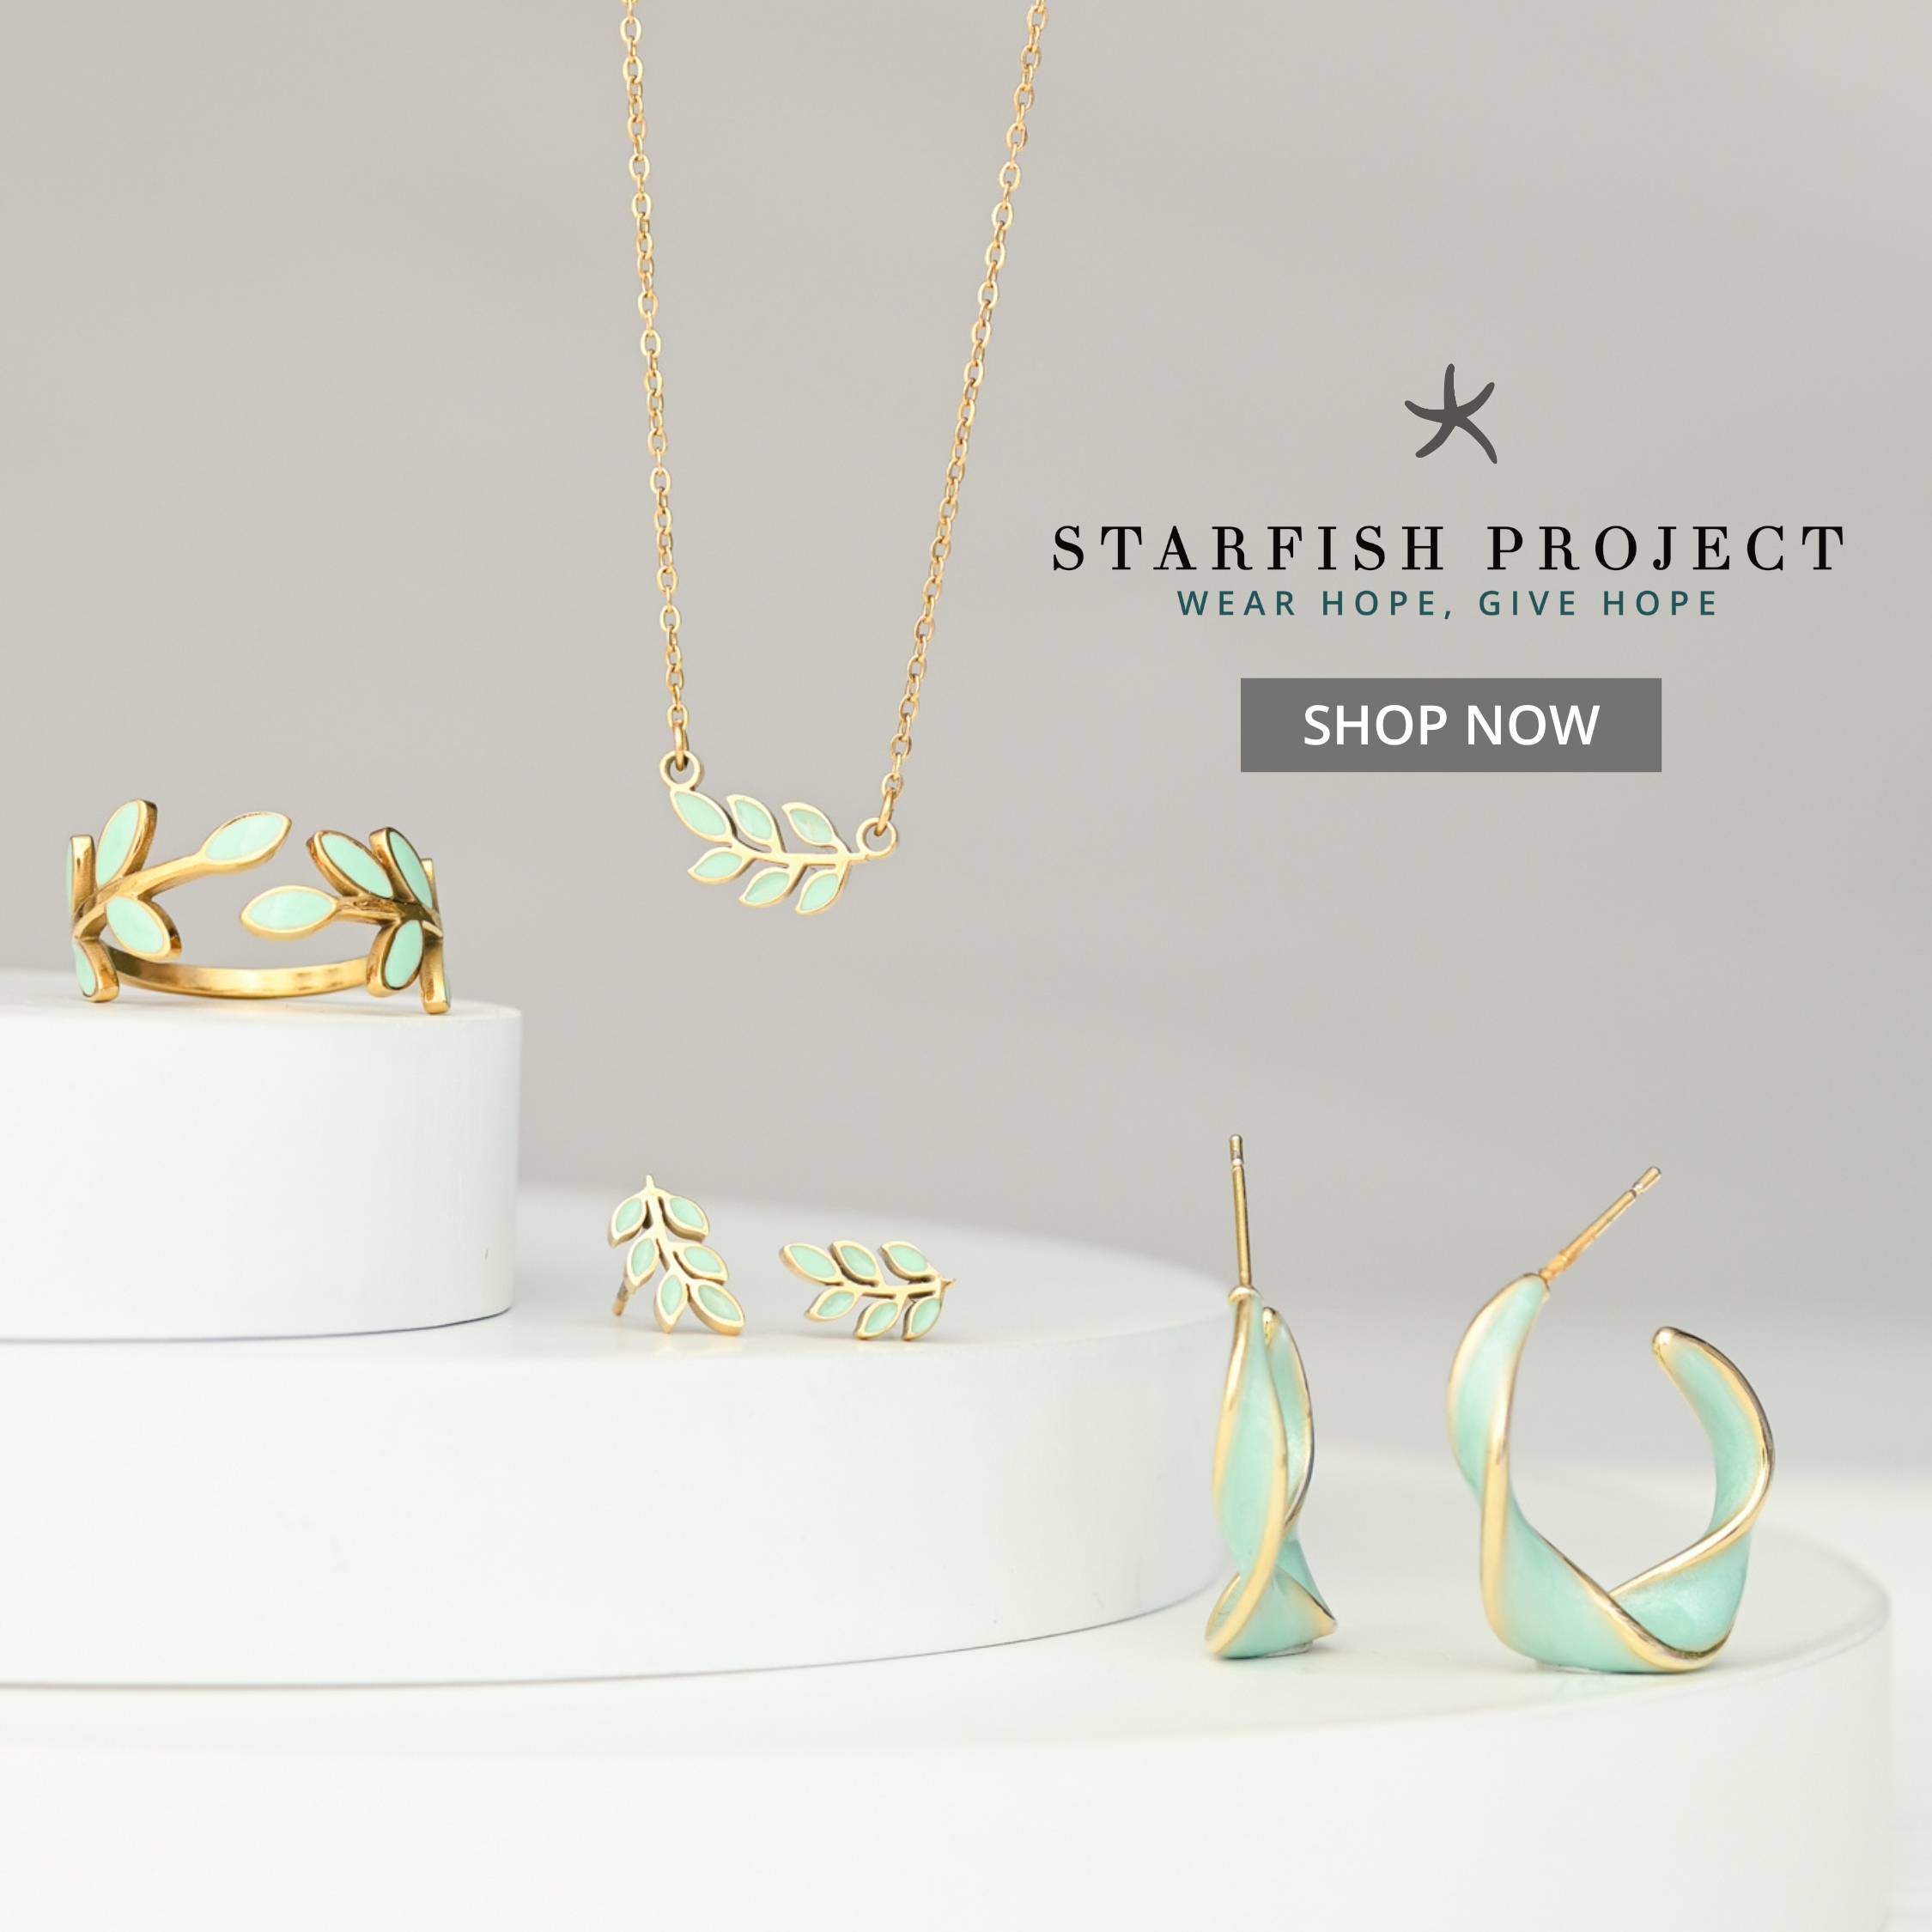 https://starfishproject.org.uk/collections/gift-sets